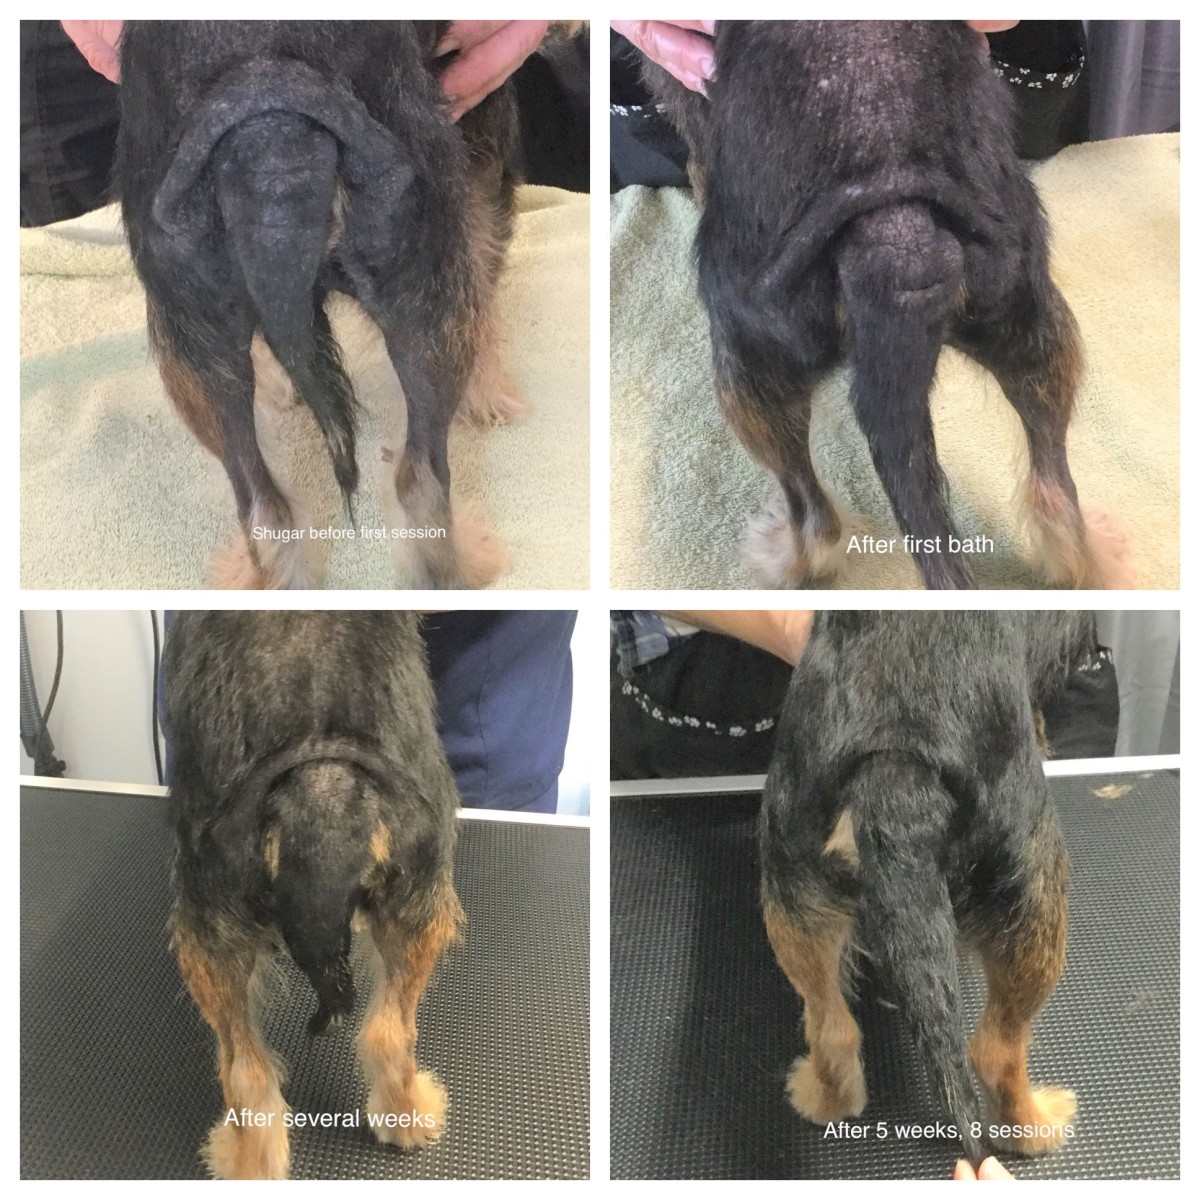 Documenting the progress of a Yorkie in Module 2.  Severe hair loss, hyperpigmentation, and "elephant skin" or lichenification, after five weeks of therapy with ISB products